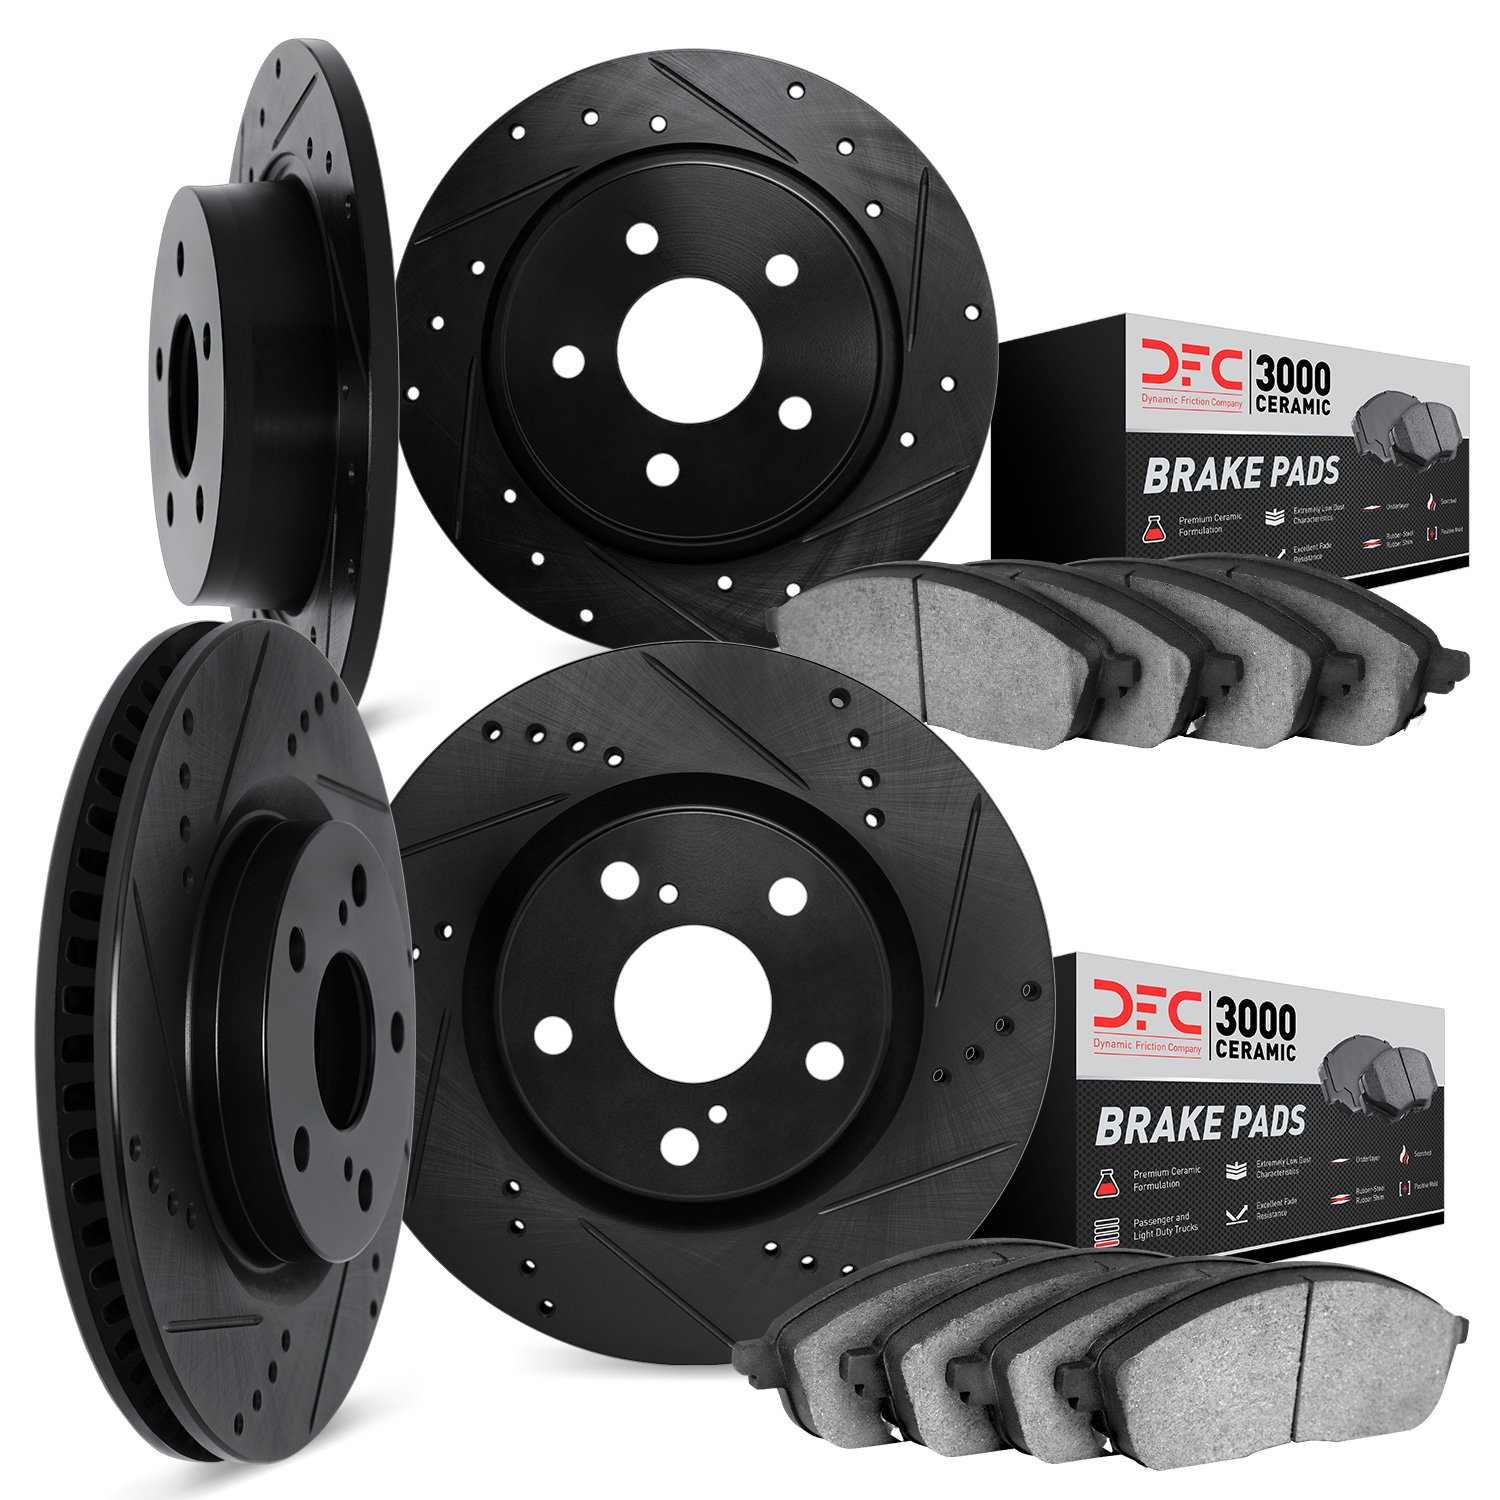 8304-31032 Drilled/Slotted Brake Rotors with 3000-Series Ceramic Brake Pads Kit [Black], 2001-2002 BMW, Position: Front and Rear